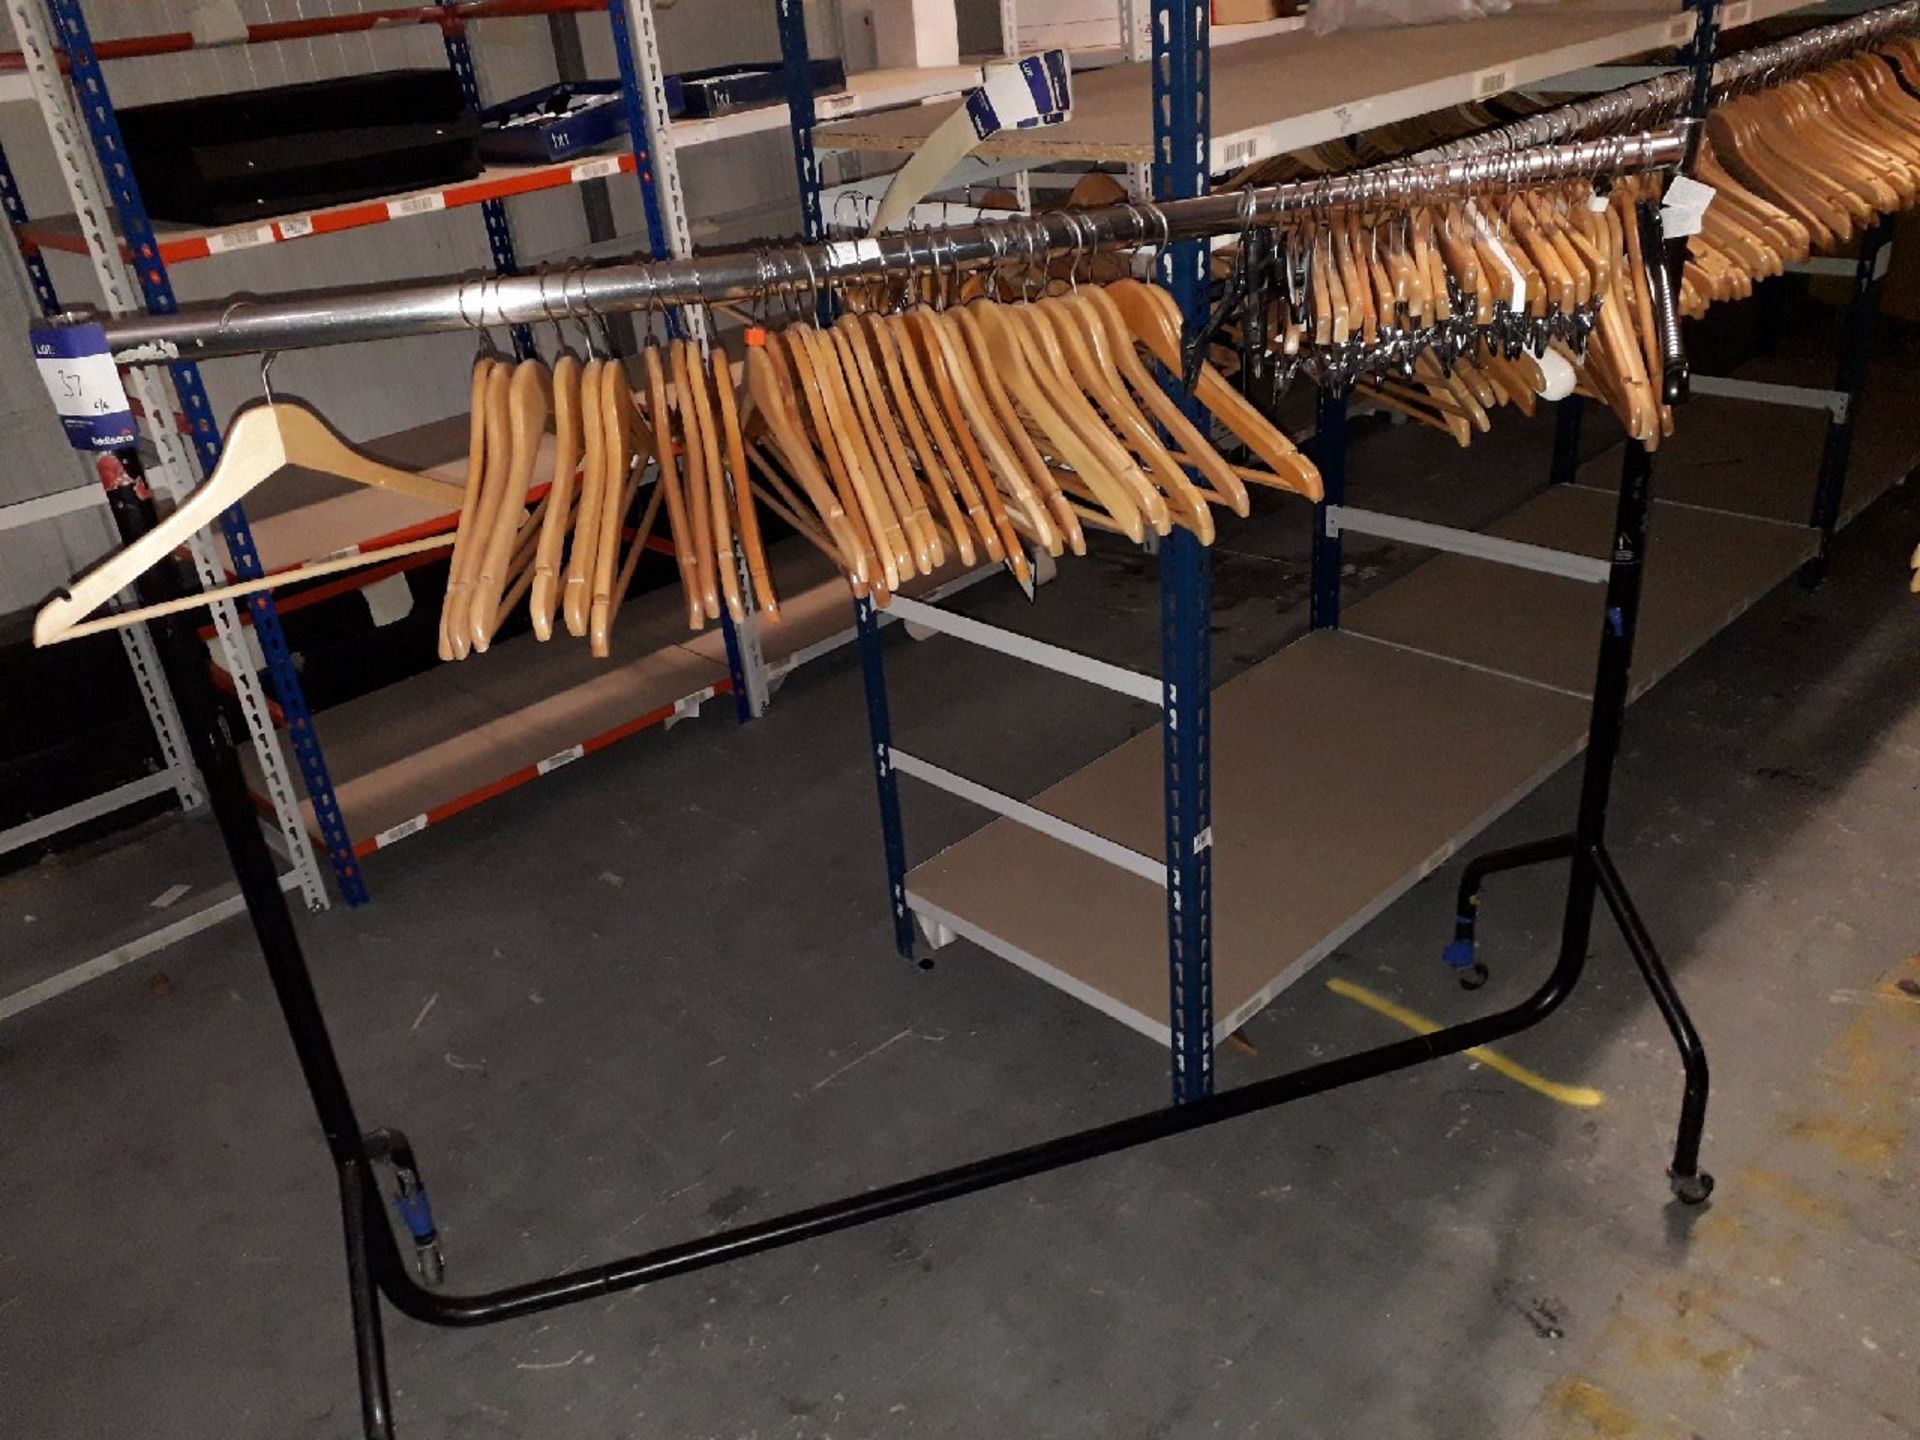 6 clothing rails including hangers (clothing not included) - Image 2 of 2